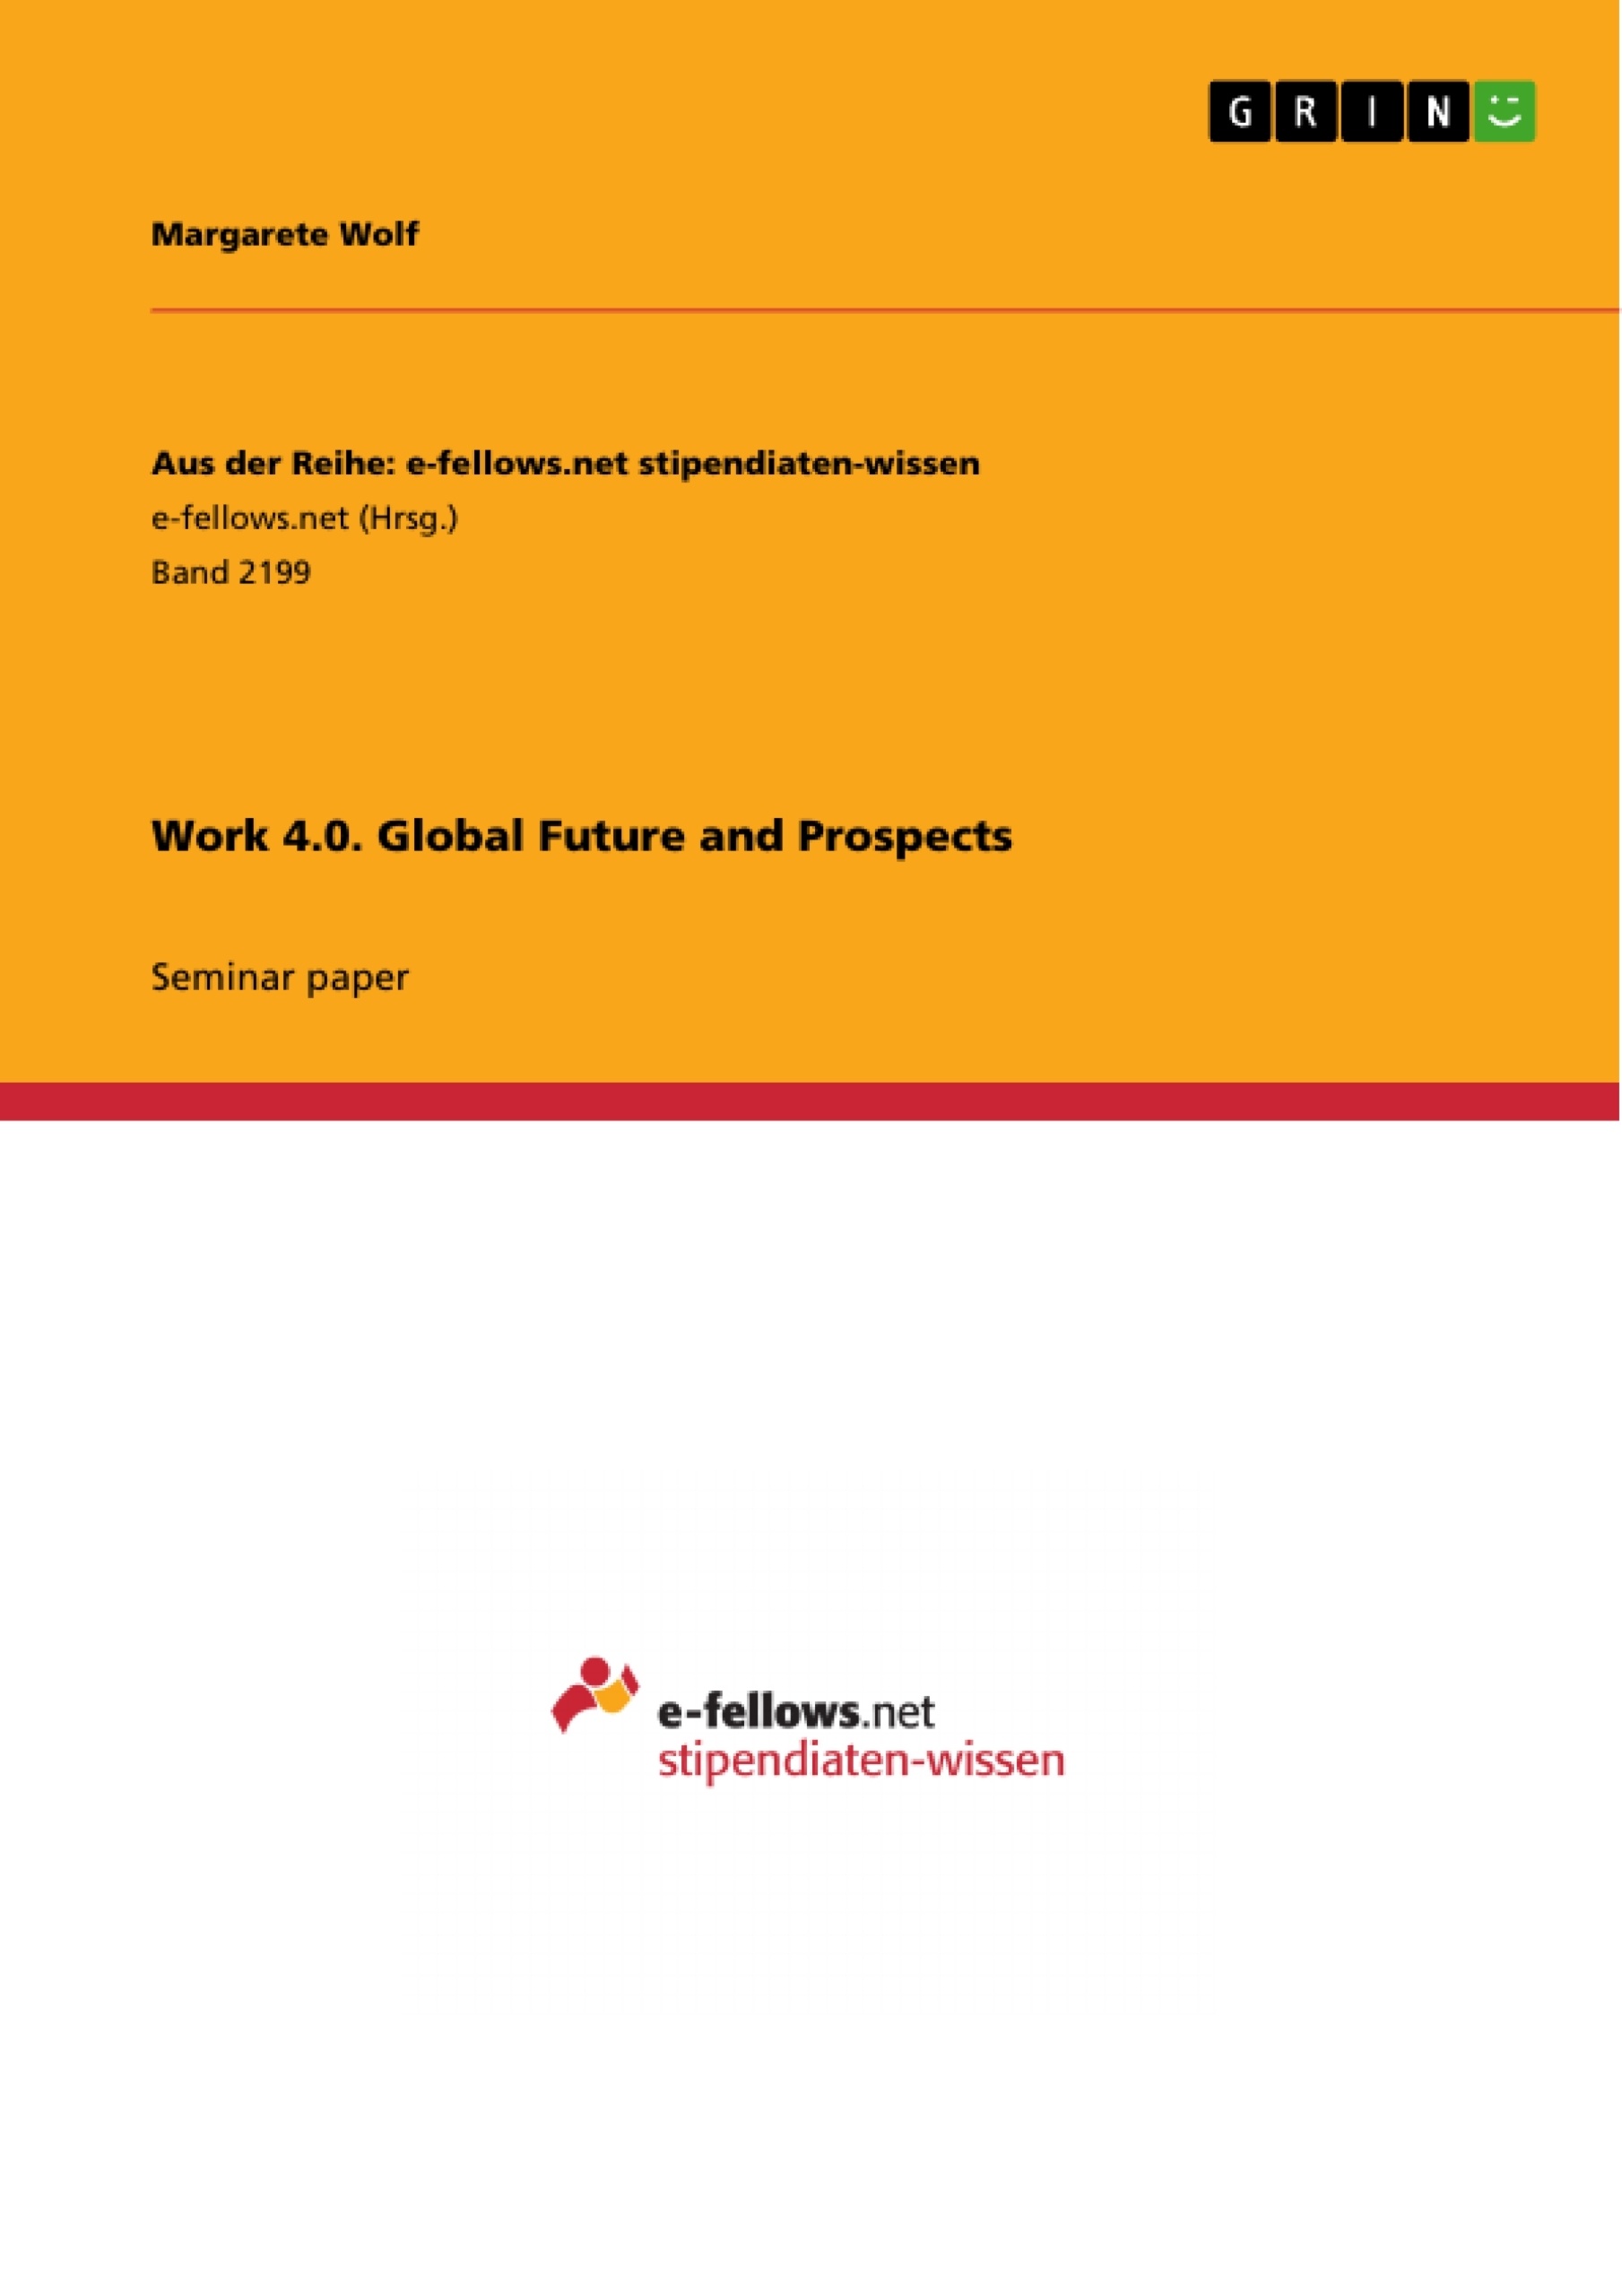 Title: Work 4.0. Global Future and Prospects